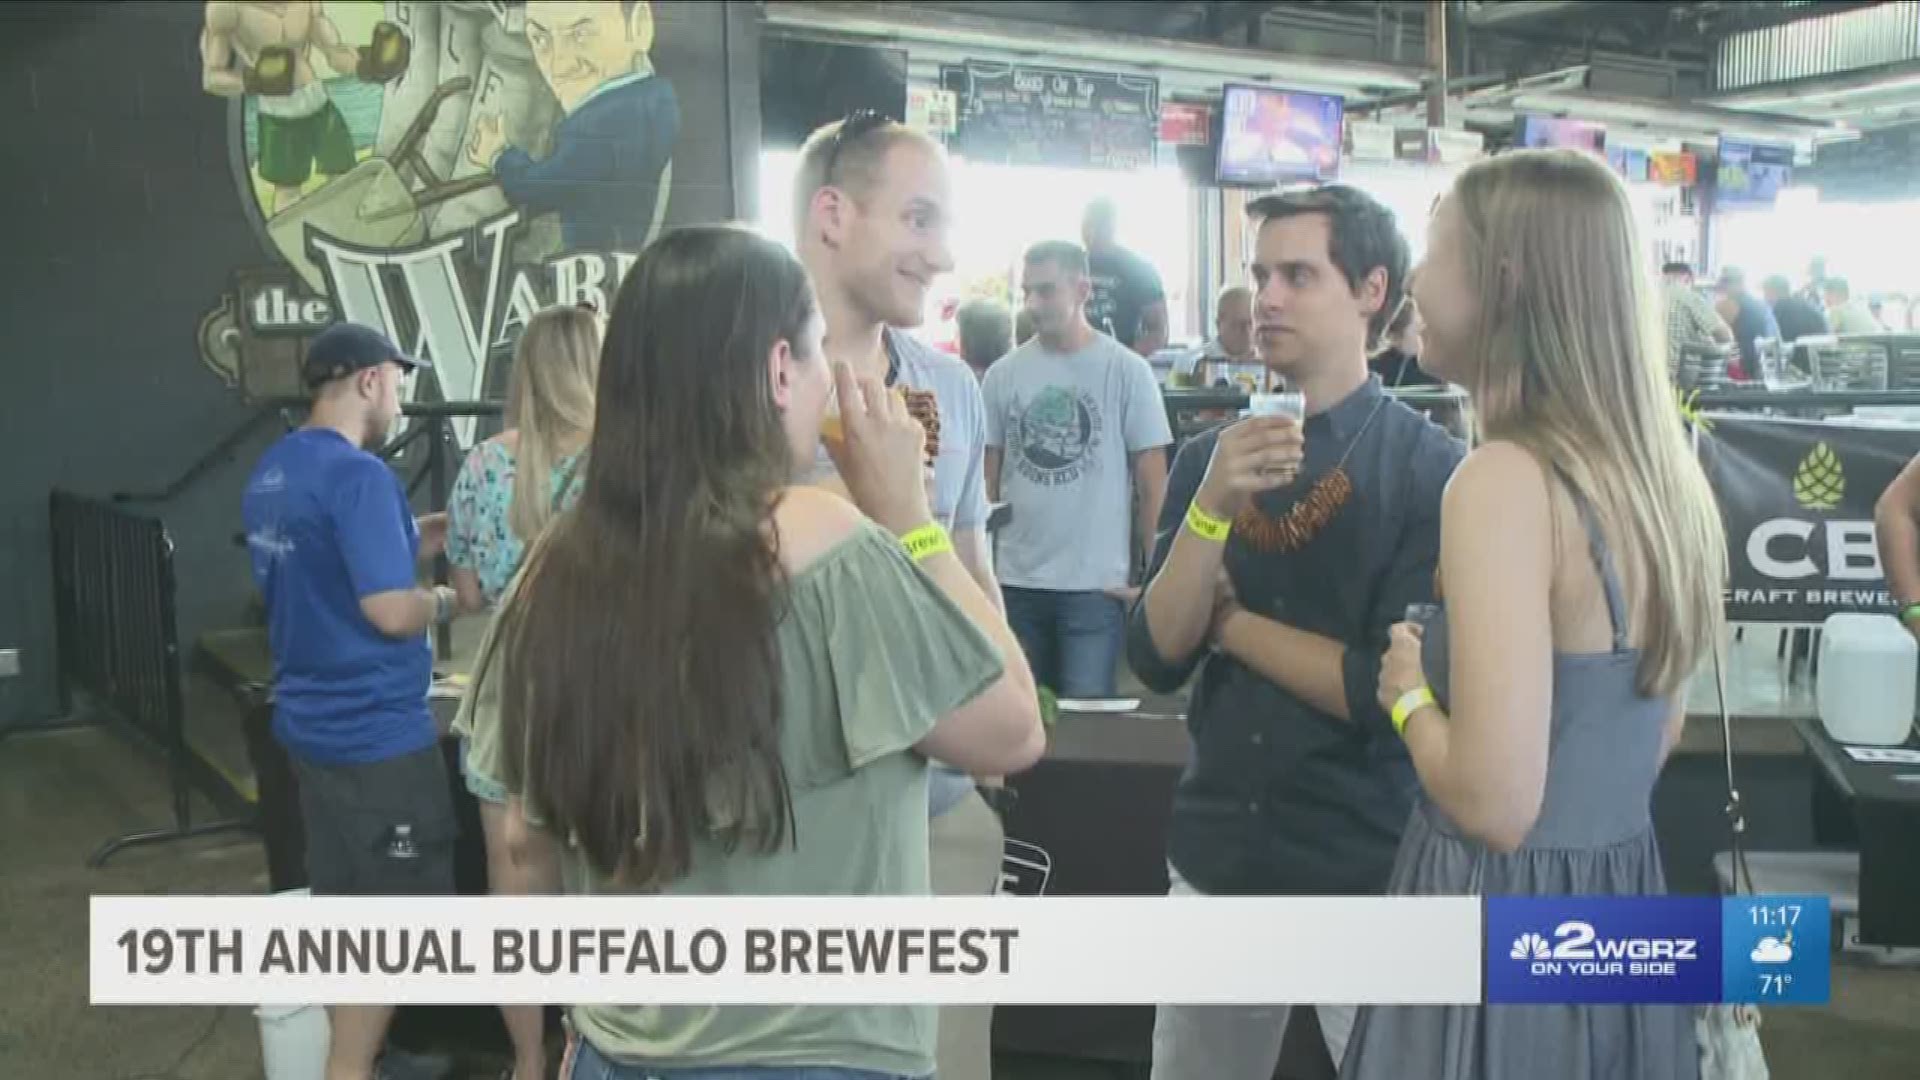 More than 100 craft brews were available for people to try tonight at Riverworks.